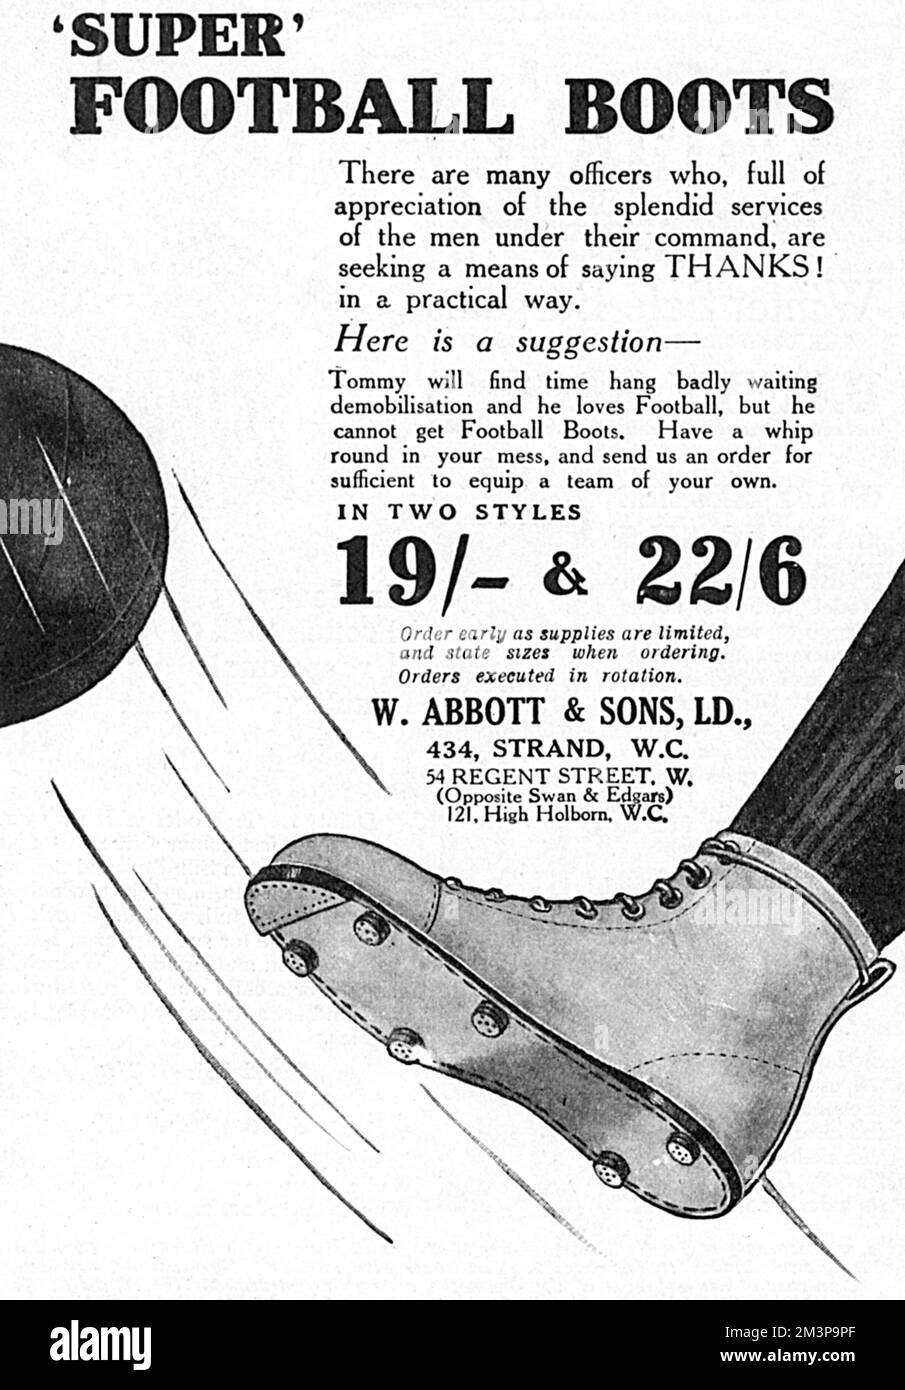 An advertisement for 'Super' football boots from W. Abbott &amp; Sons of the Strand and Regent Street.  The advert suggests to officers that a pair would make a perfect gift to express appreciation of their men, and that playing football would pass the time while waiting for demobilisation.  In fact, it suggests having a whip round at the mess and equipping a whole team!       Date: 1918 Stock Photo